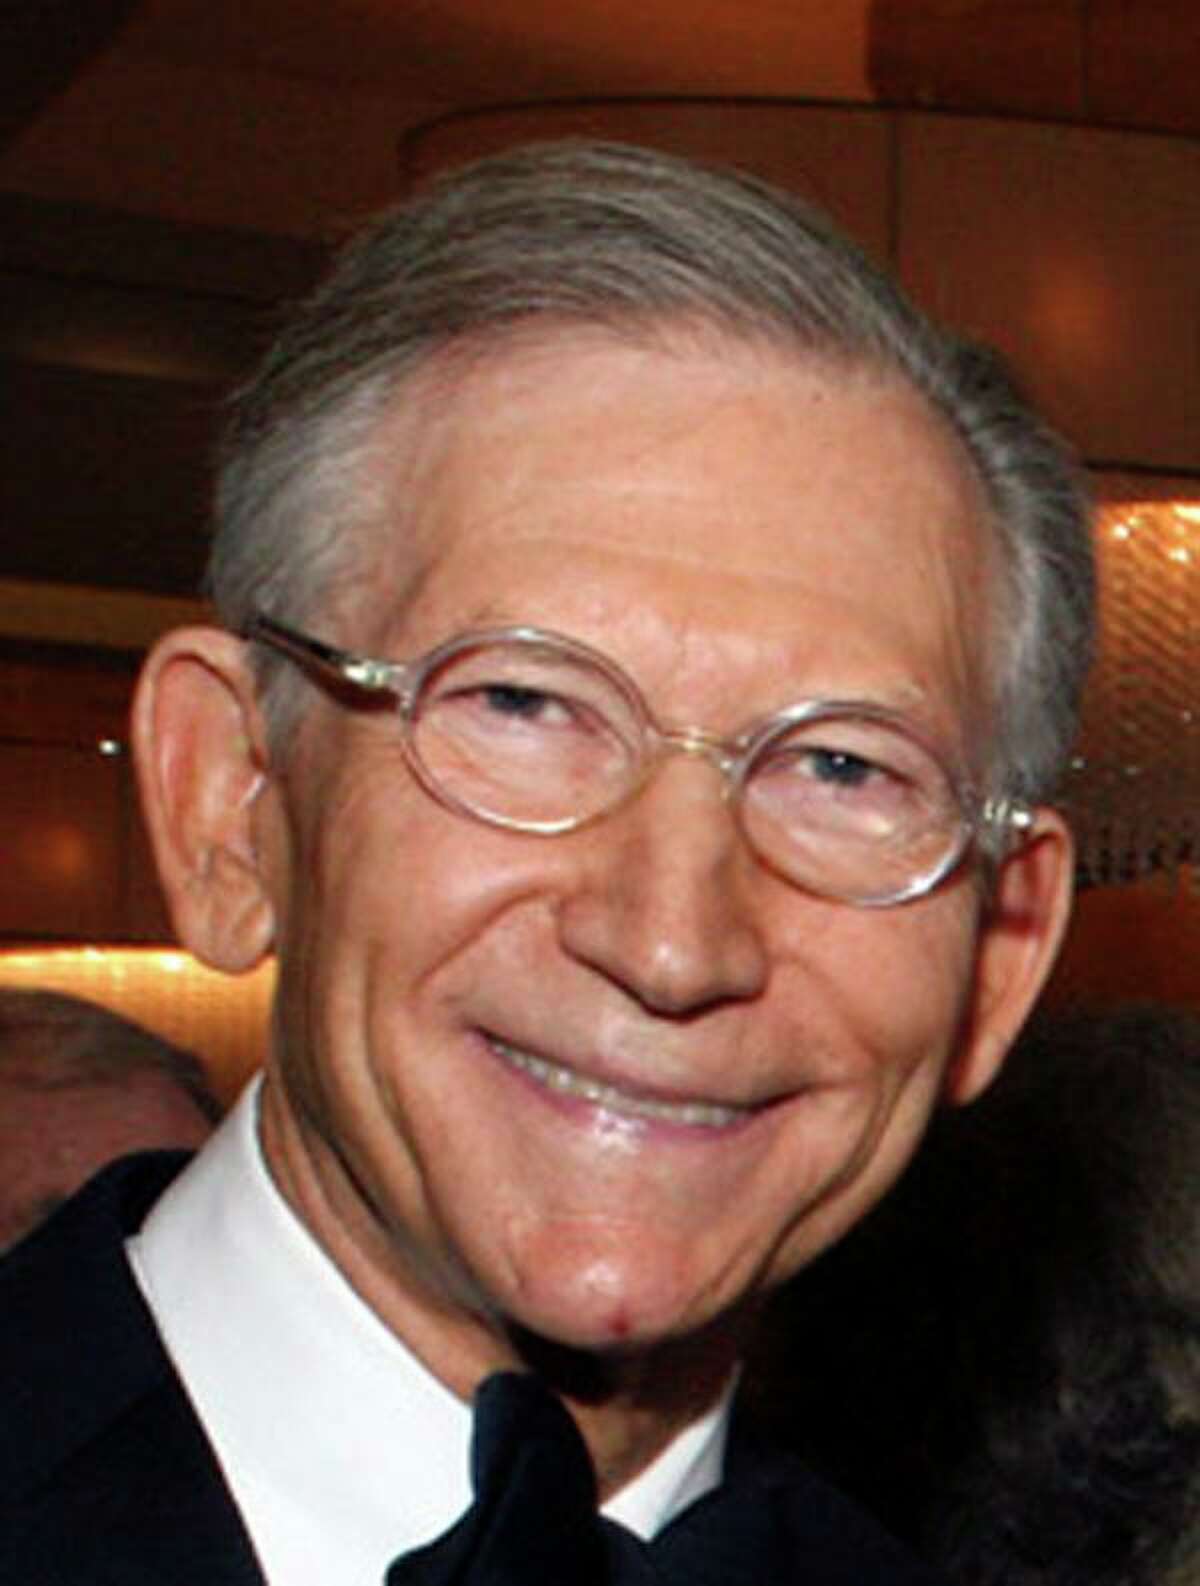 Charles Butt, the head of H-E-B, was listed by Forbes as one of the 400 most wealthy in America.